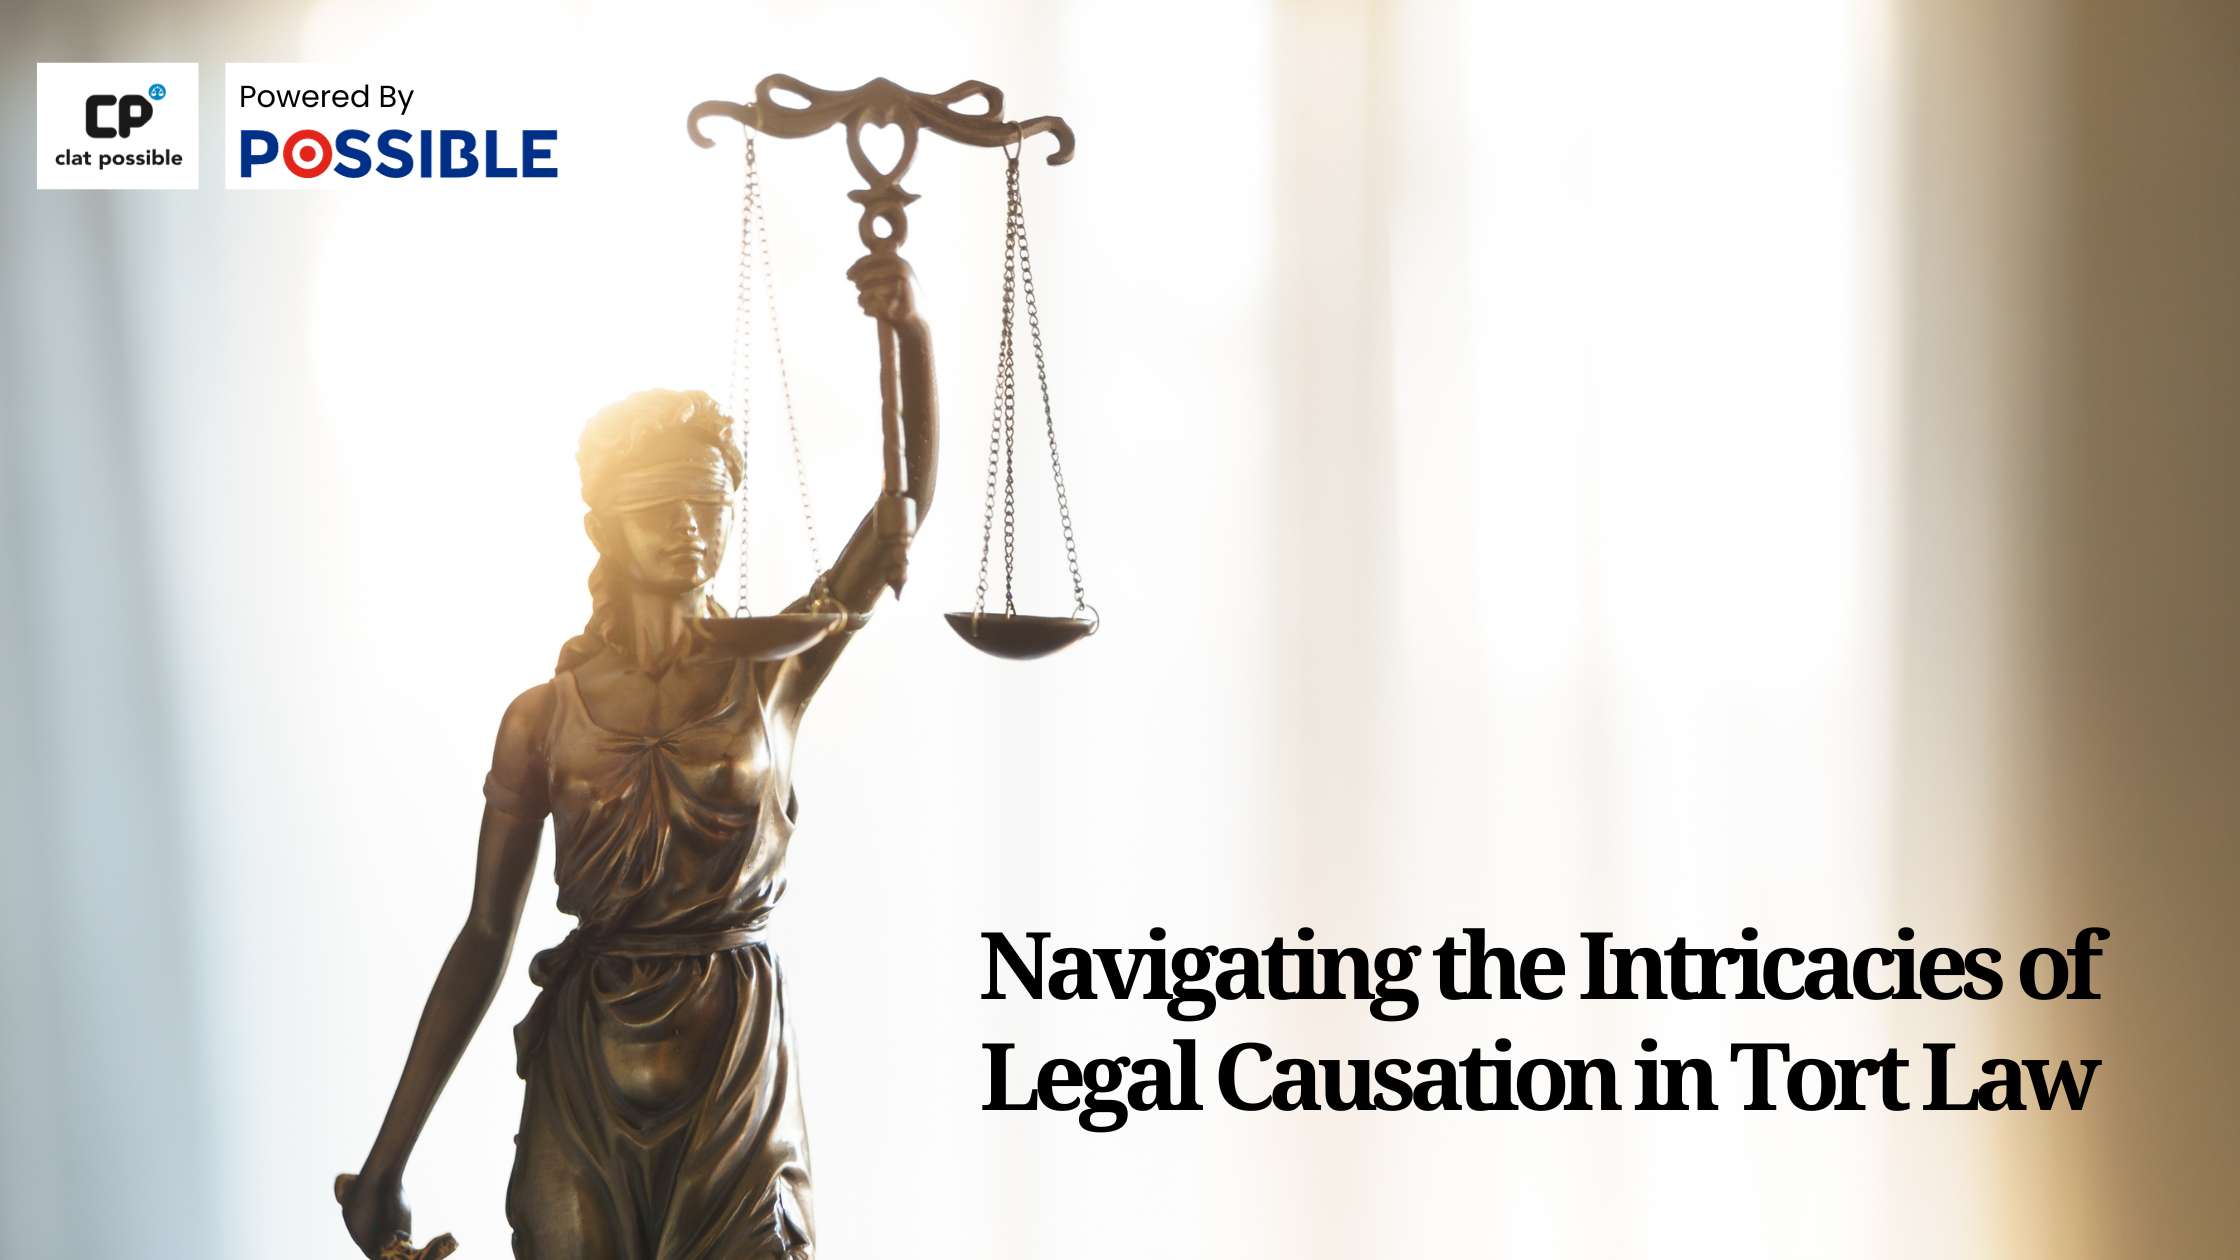 Legal Causation in Tort Law